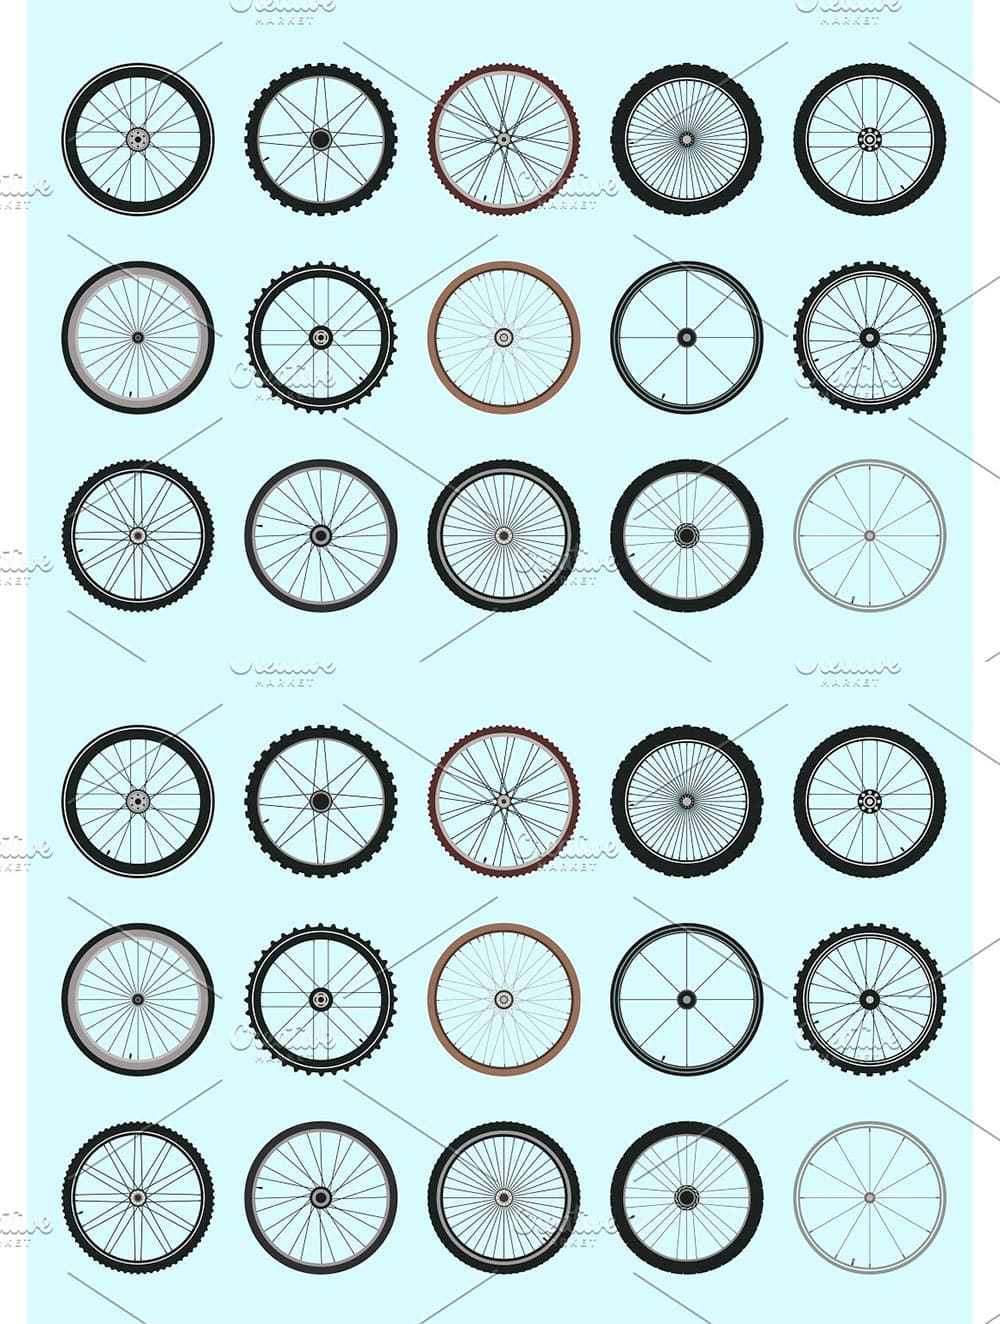 Bicycle wheels with spokes geometric, picture for pinterest.